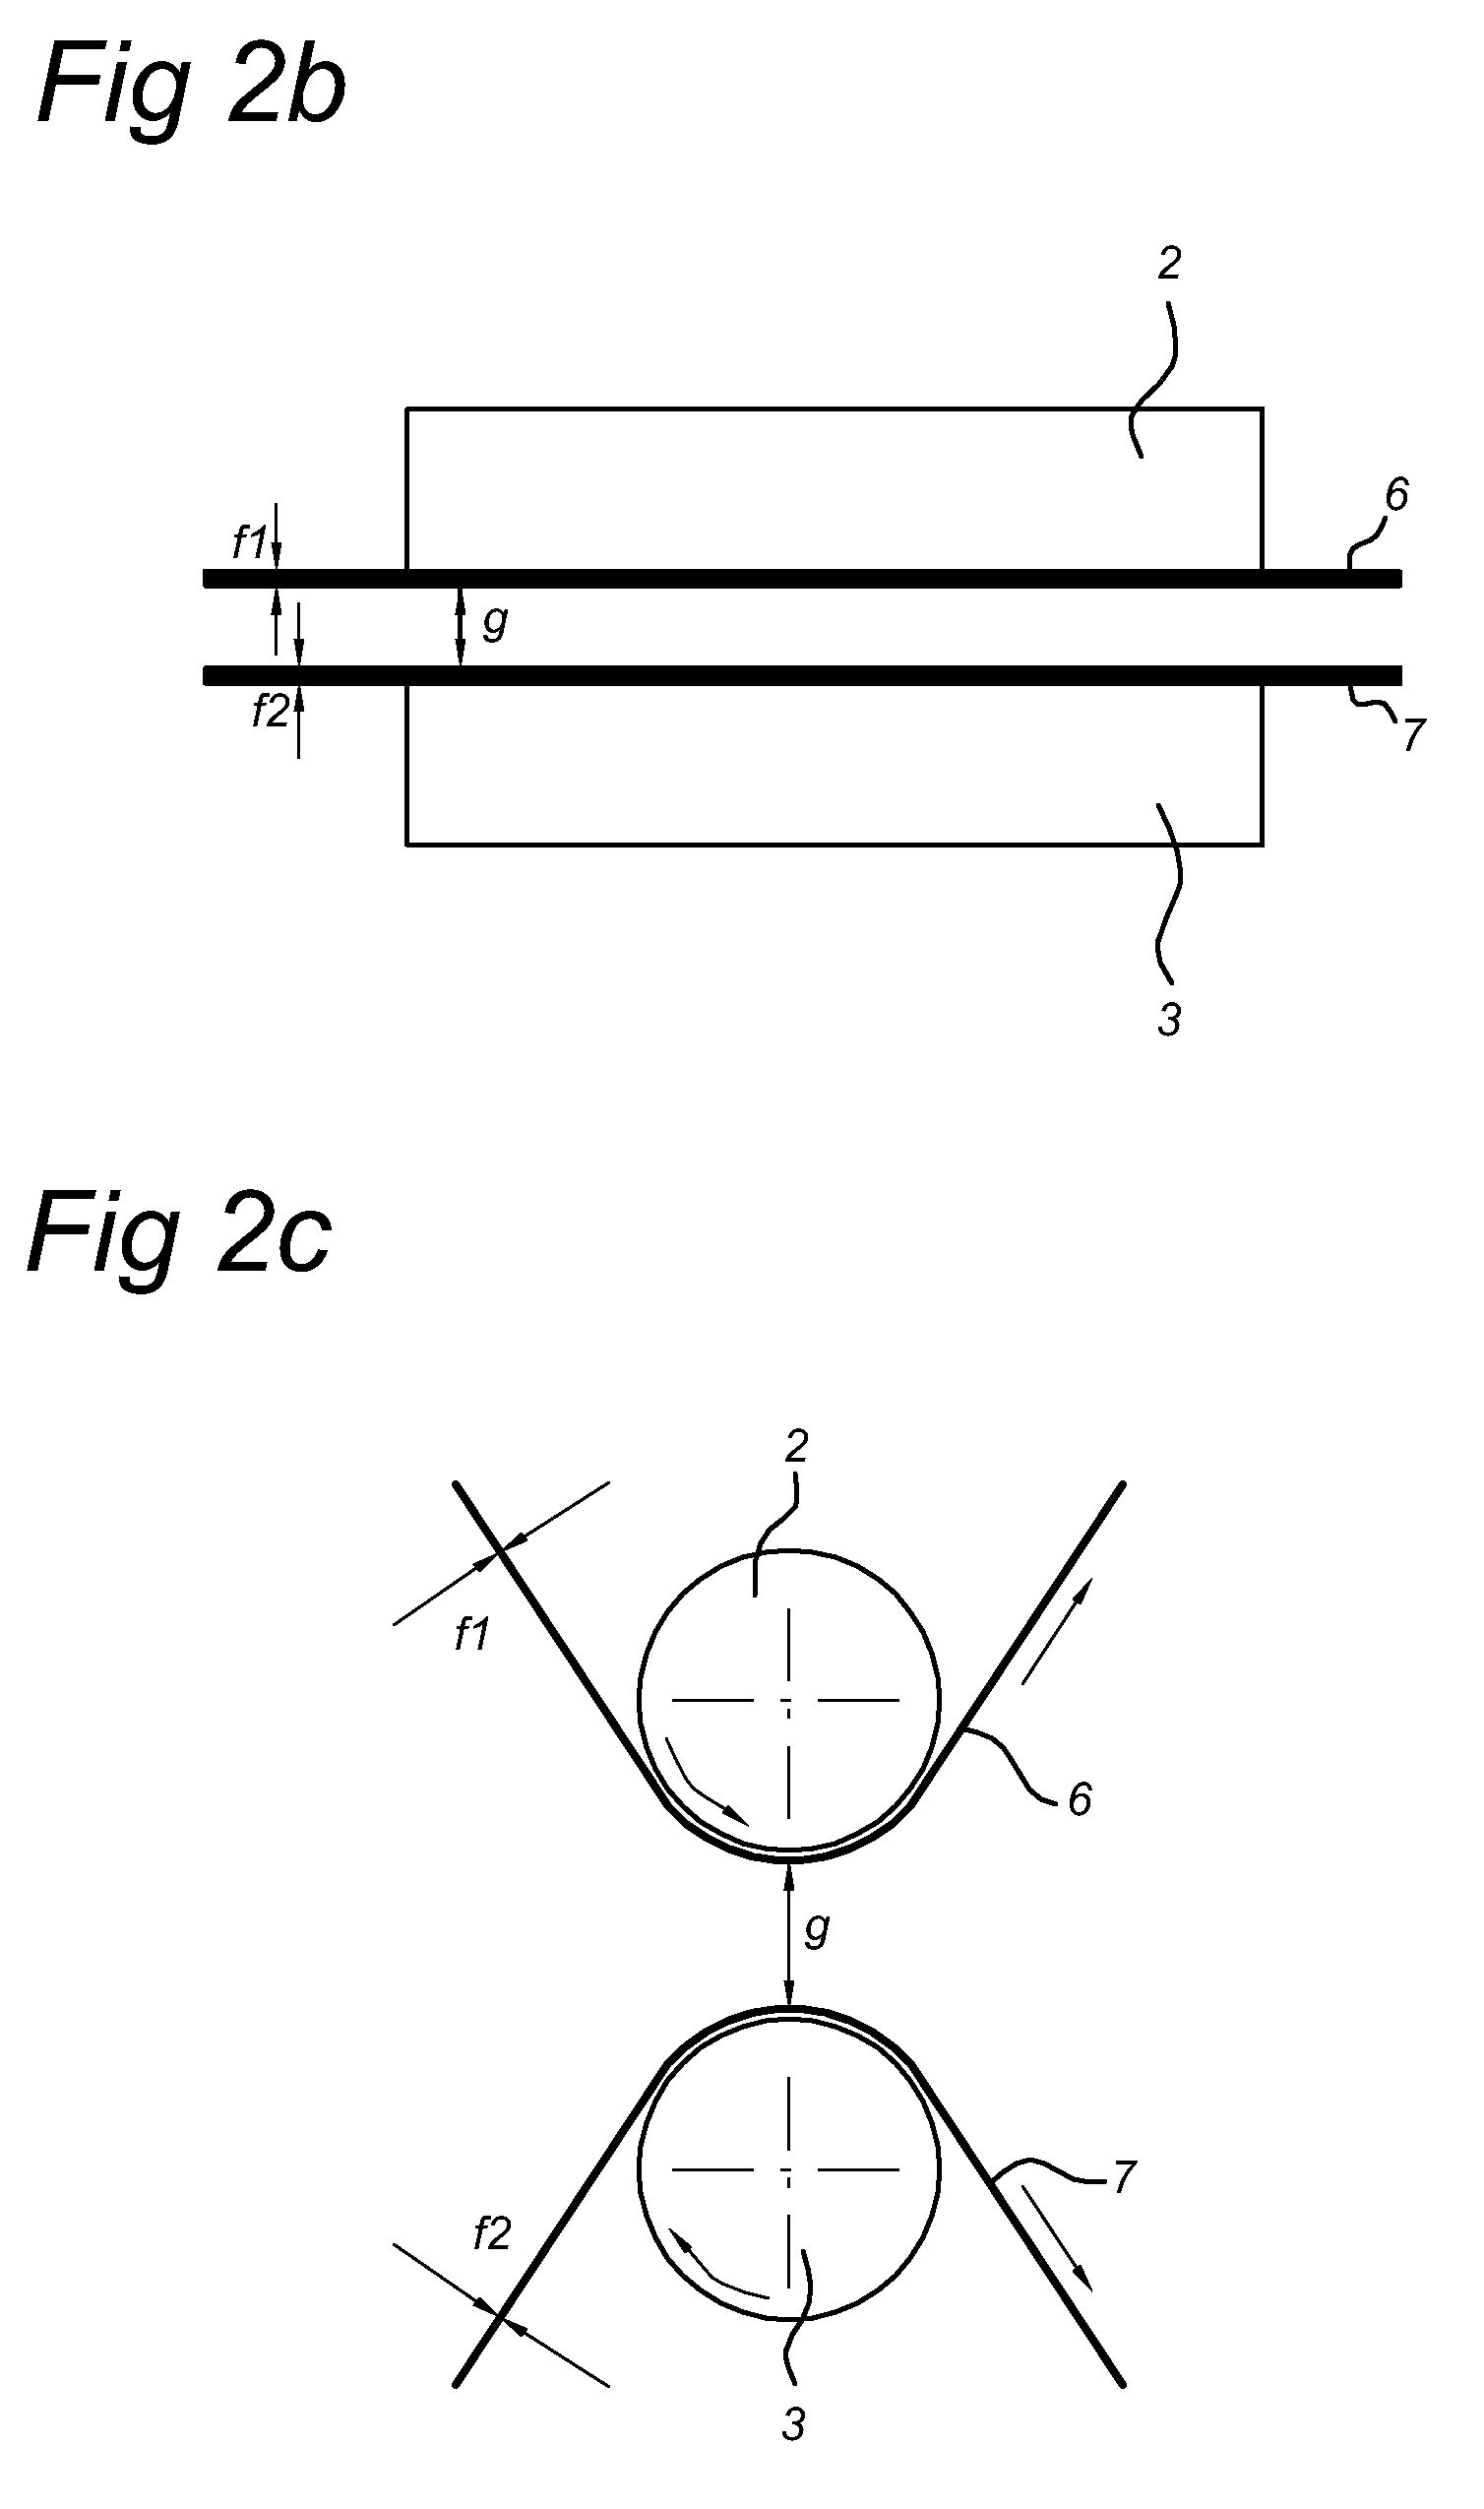 Plasma treatment apparatus and method for treatment of a substrate with atmospheric pressure glow discharge electrode configuration